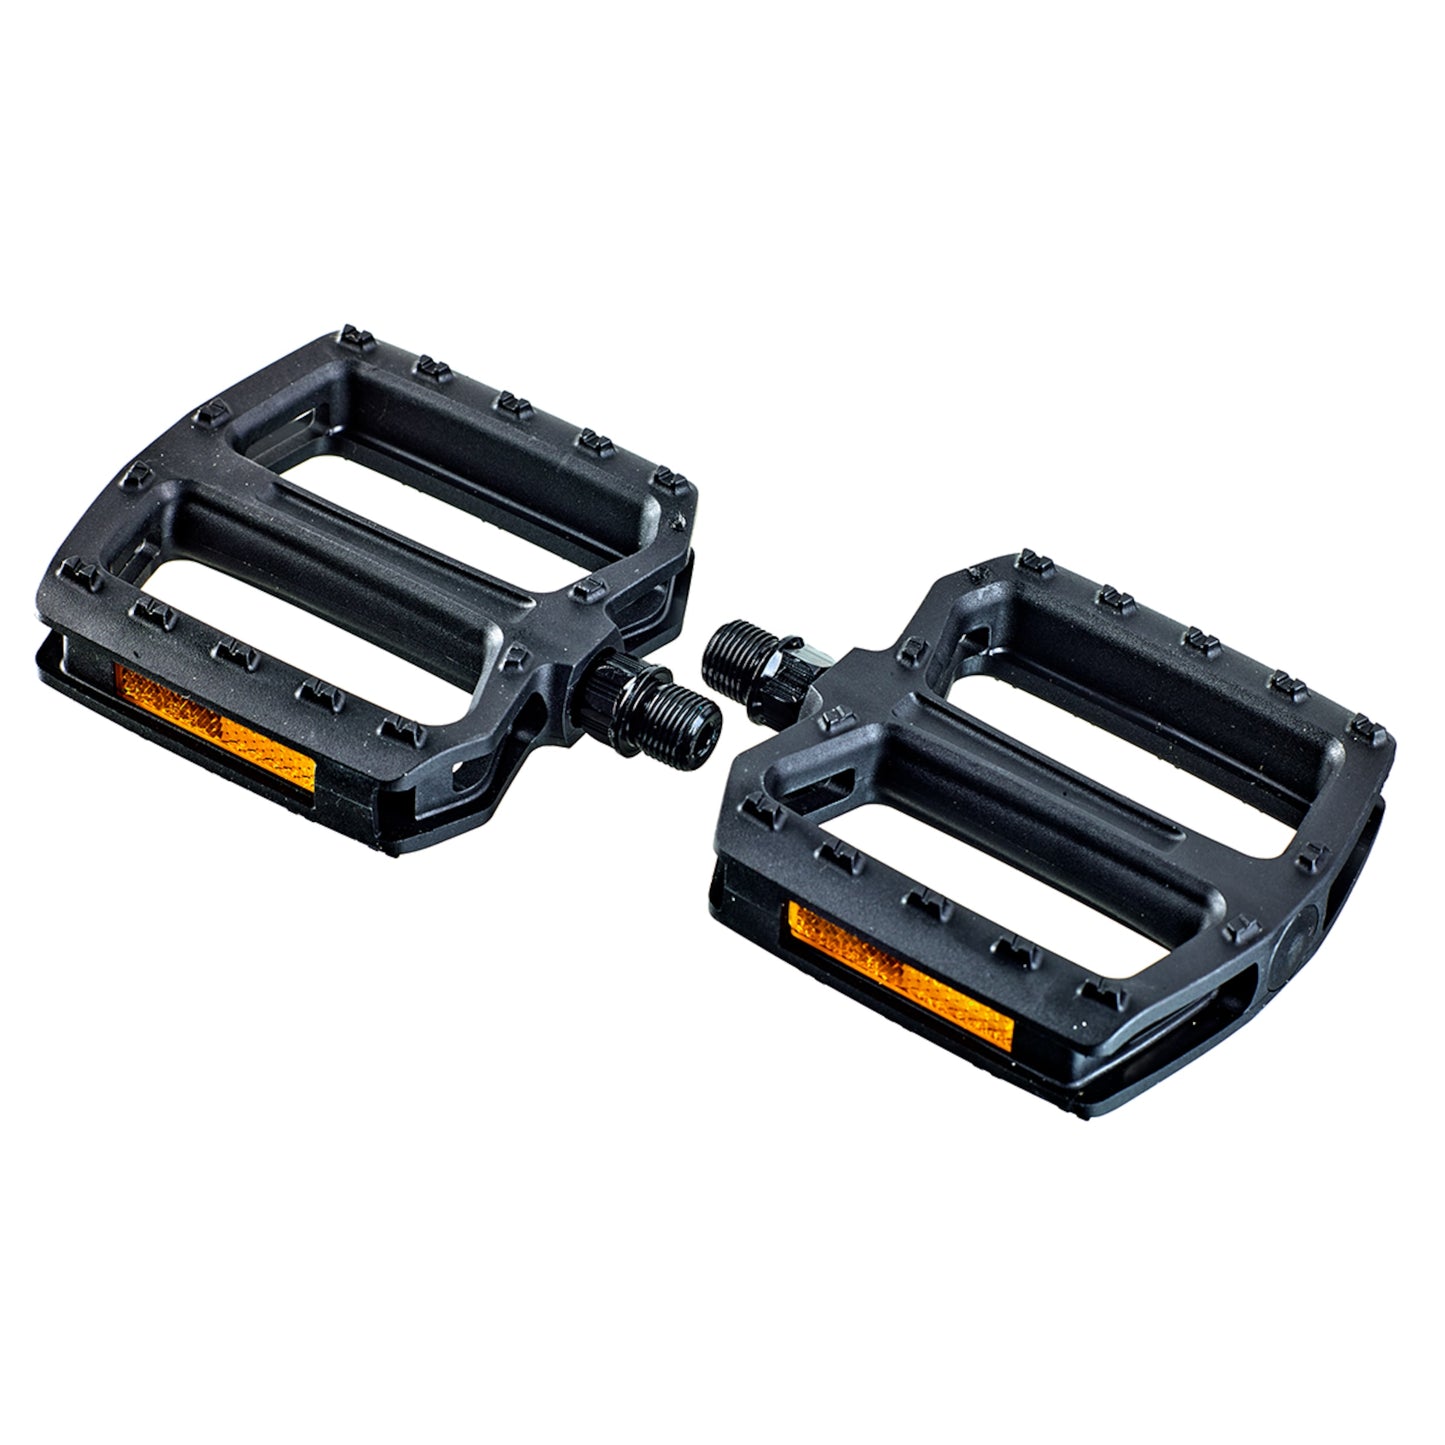 VP-537 Alloy Pedals w/ Reflectors (Made in Taiwan)